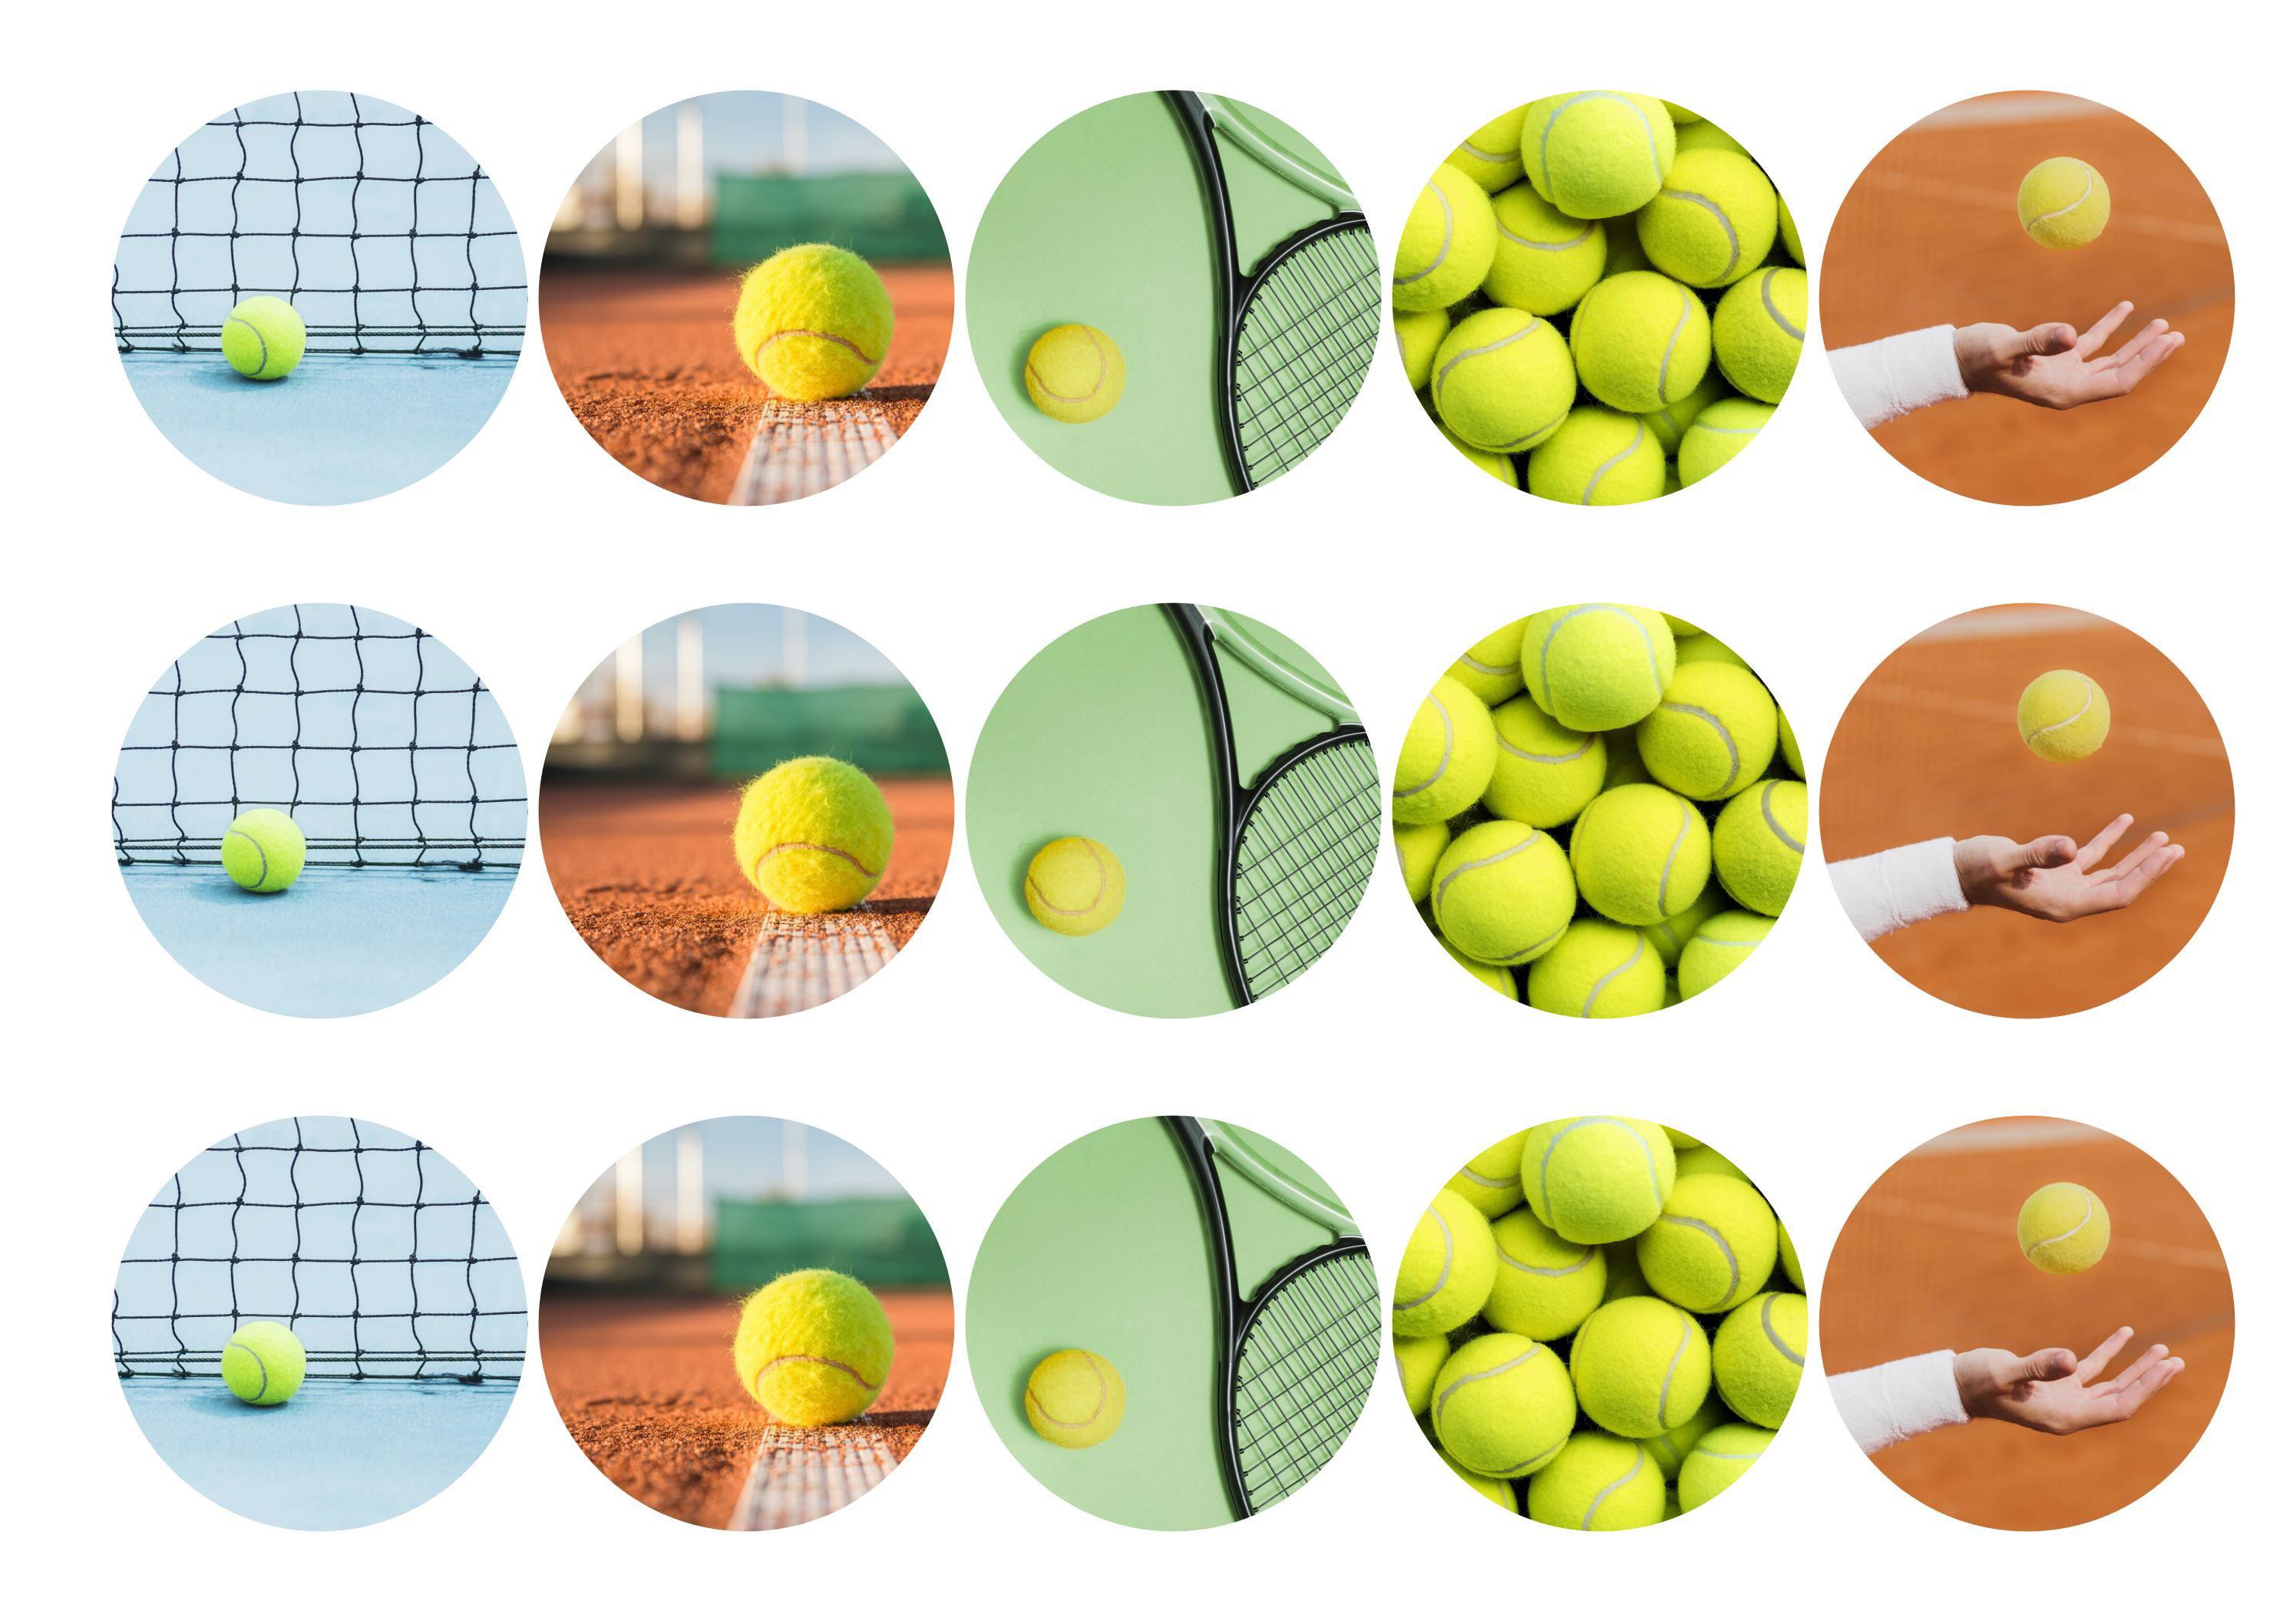 15 printed cupcake toppers with tennis equipment